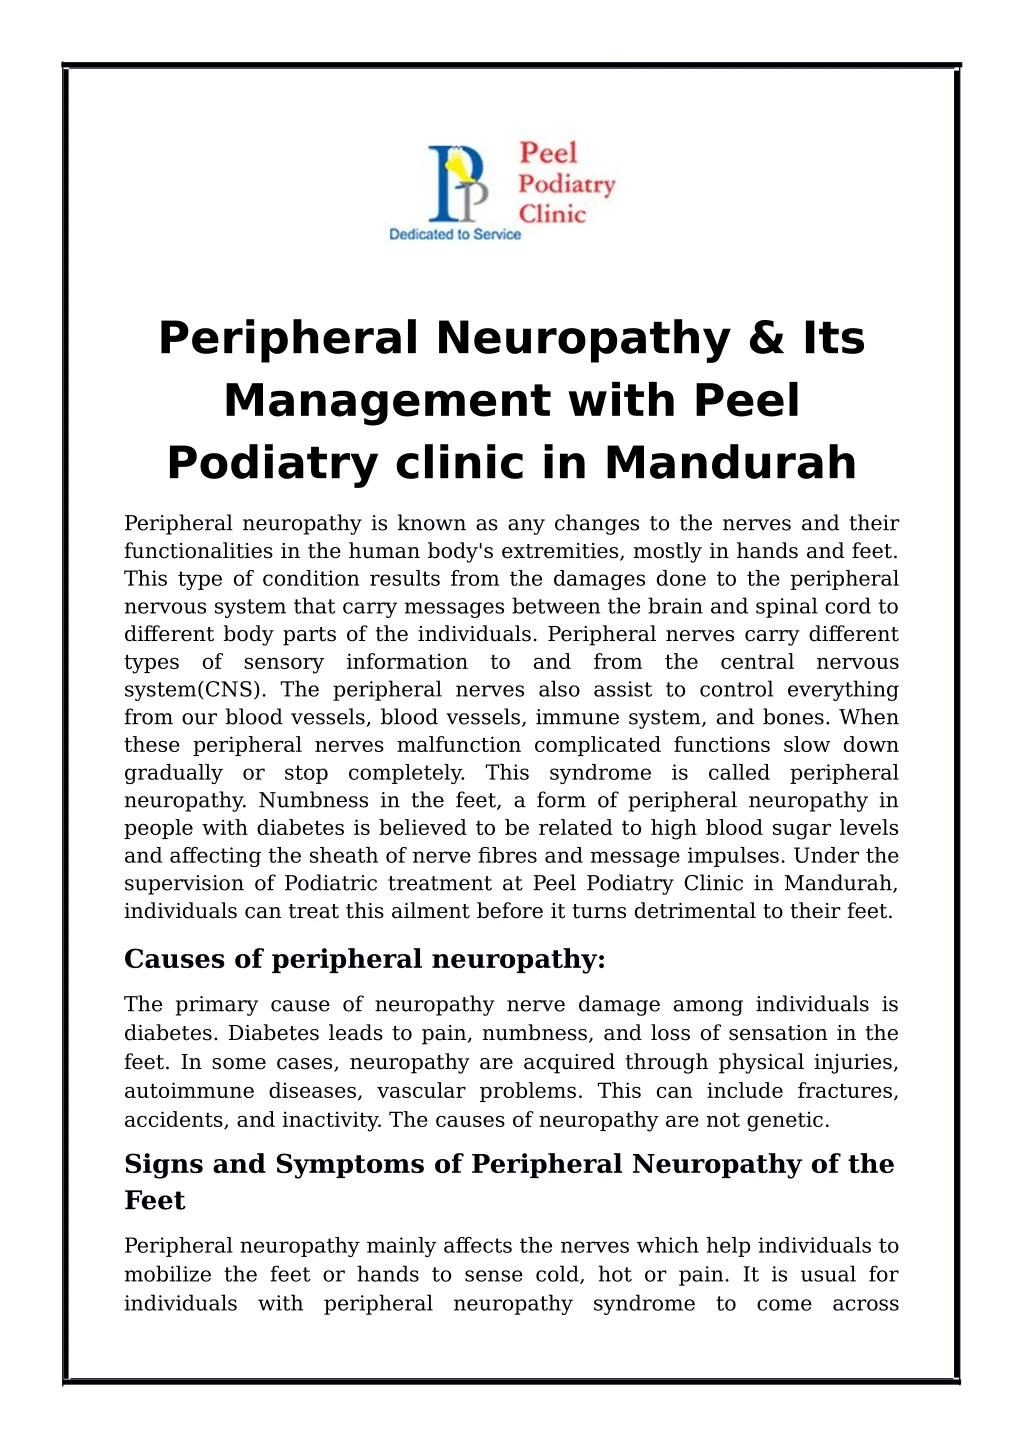 peripheral neuropathy its management with peel